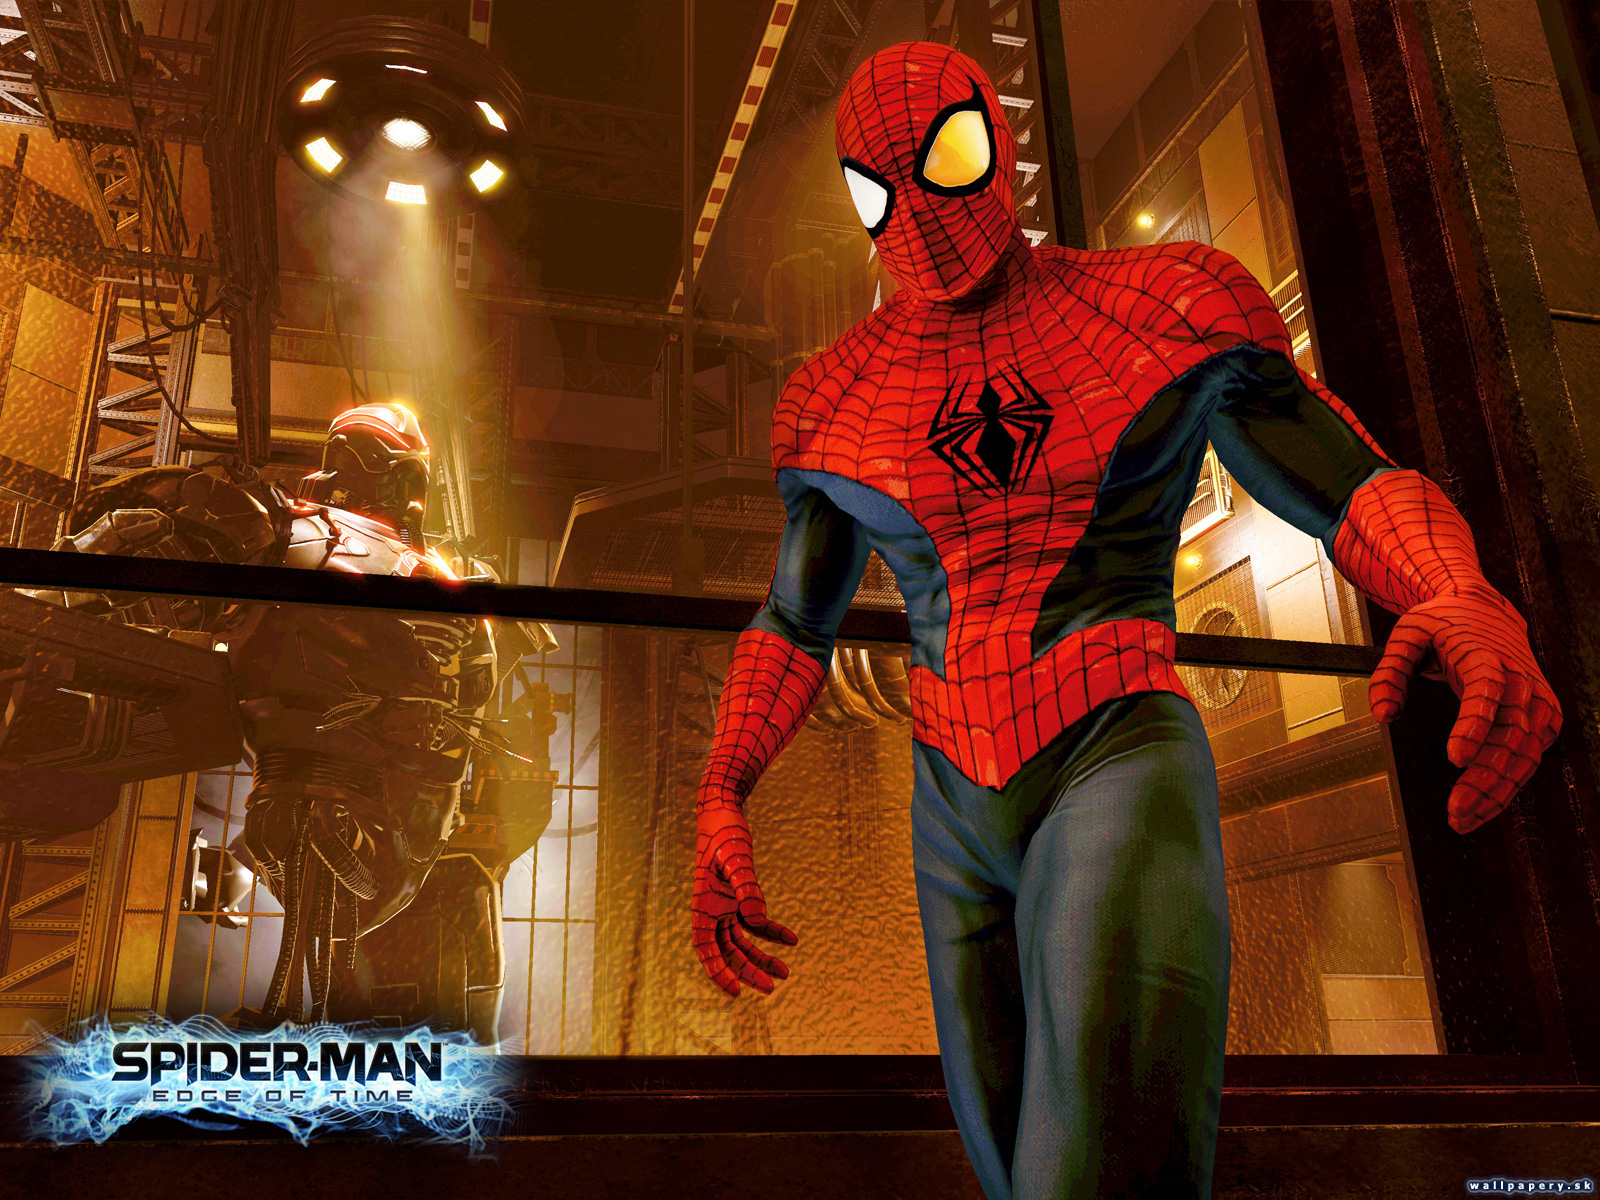 Spider-Man: Edge of Time - wallpaper 2